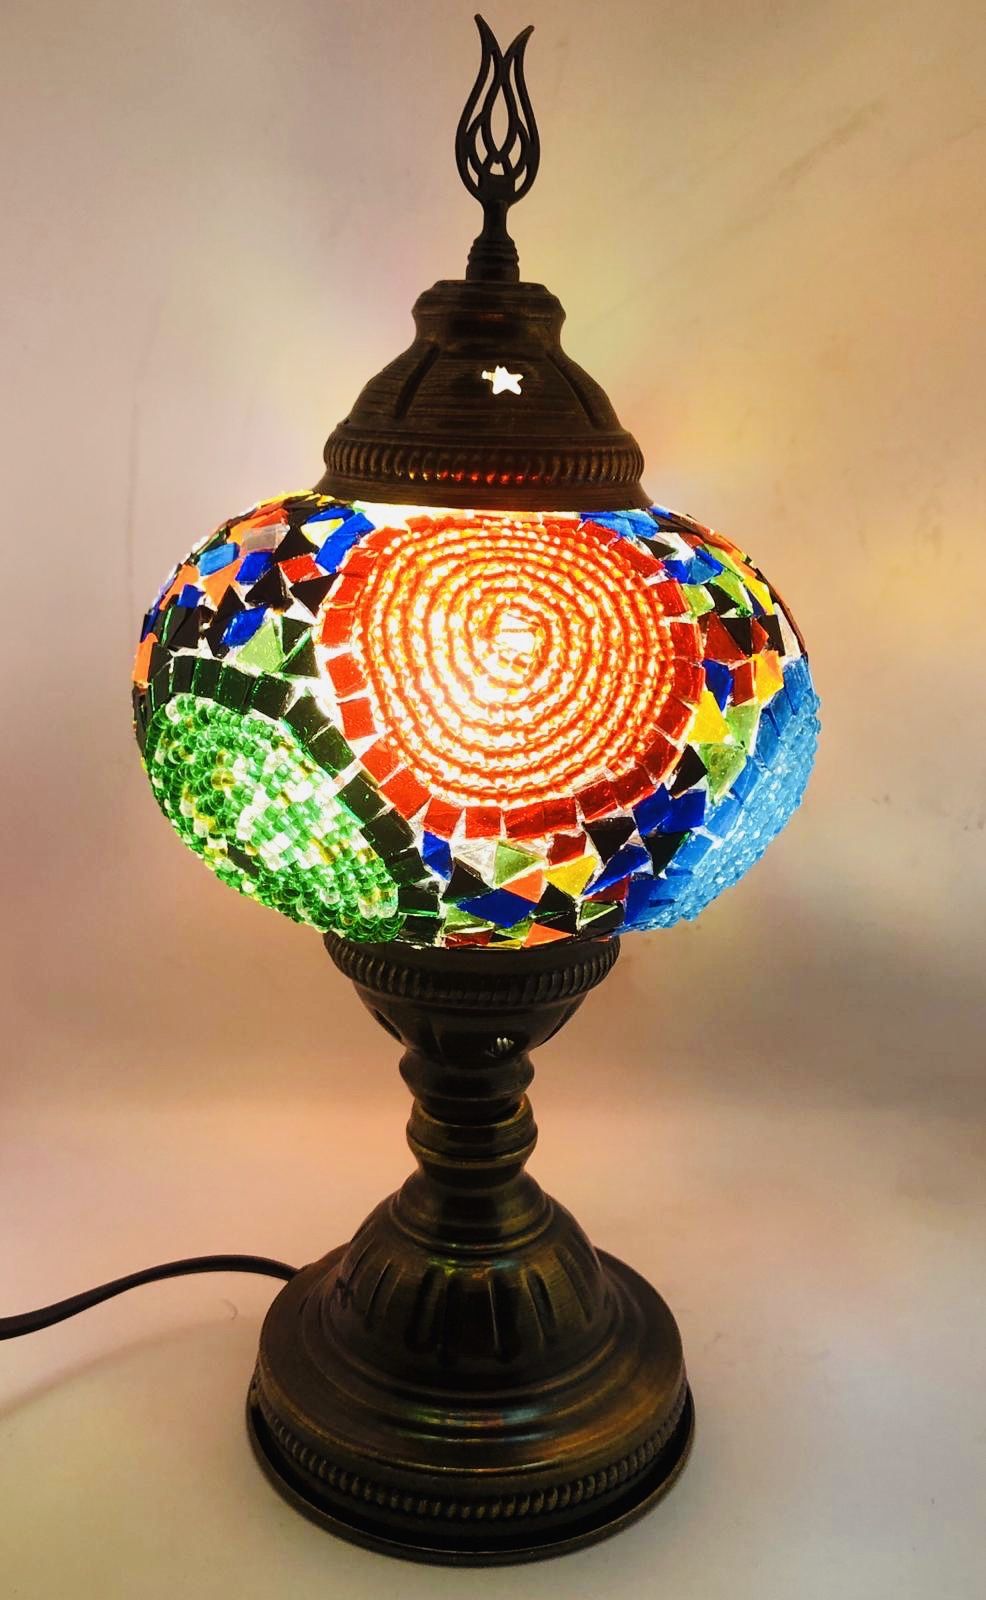 Handcrafted Turkish Mosaic Glass Table Lamp|Great Home Decor for Living Room, Bed Room, Game Room, Media Room| Also Great for Dorm Room, Bar & Nigh